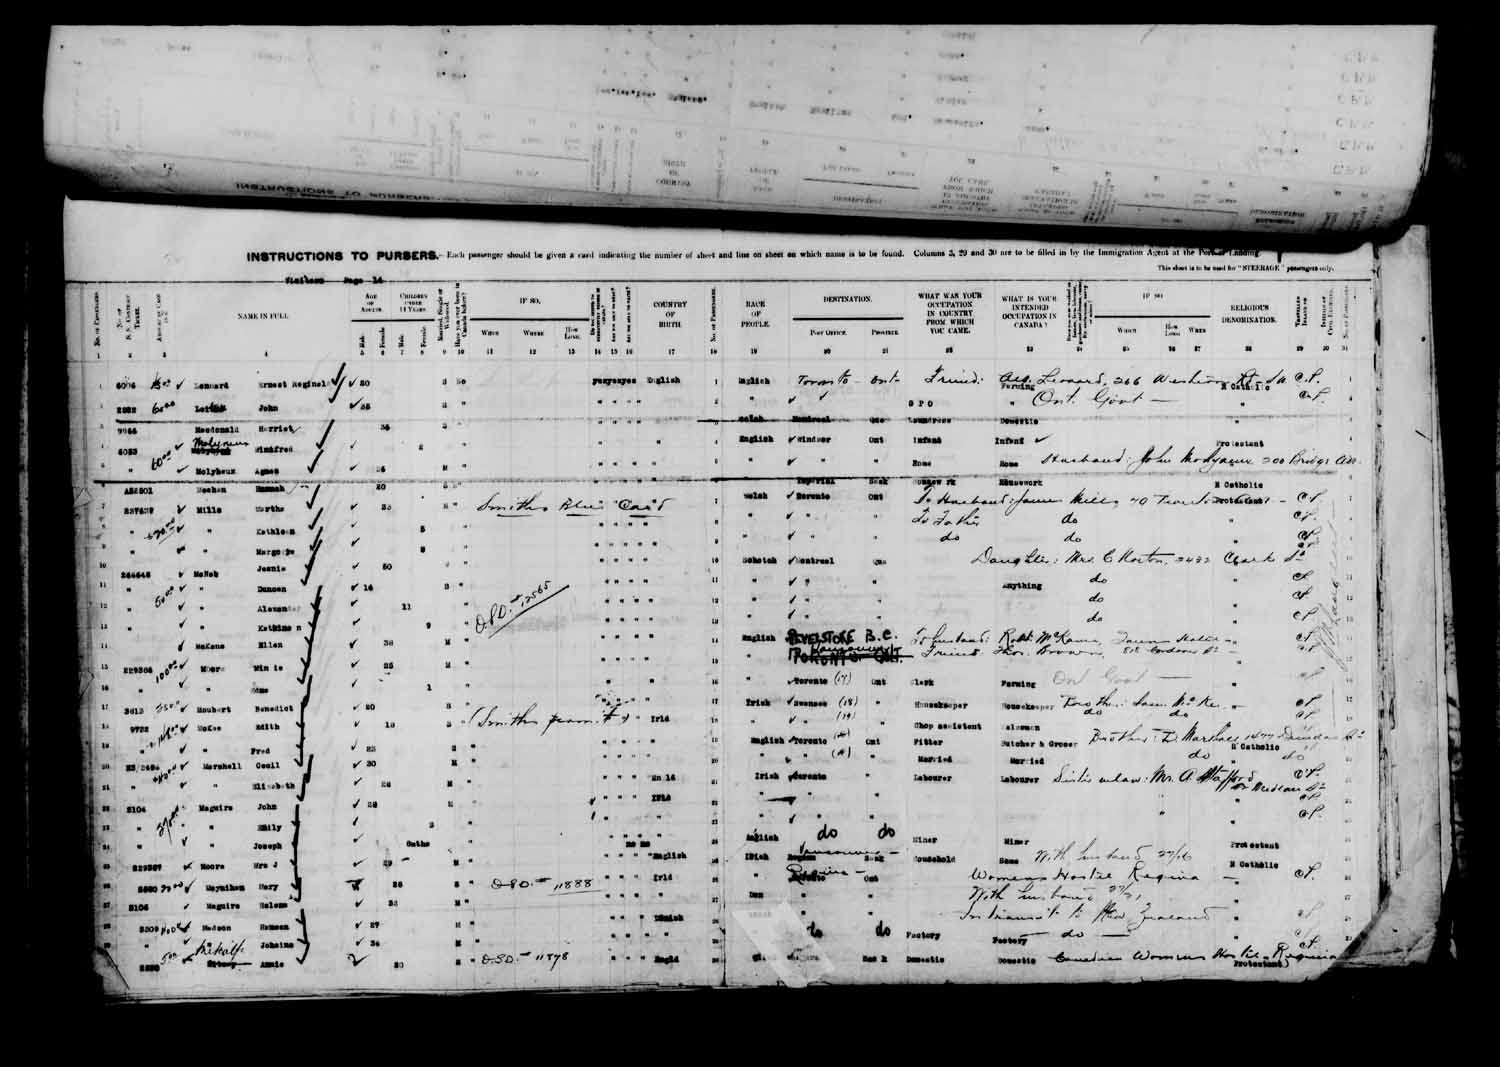 Digitized page of Passenger Lists for Image No.: e003610654